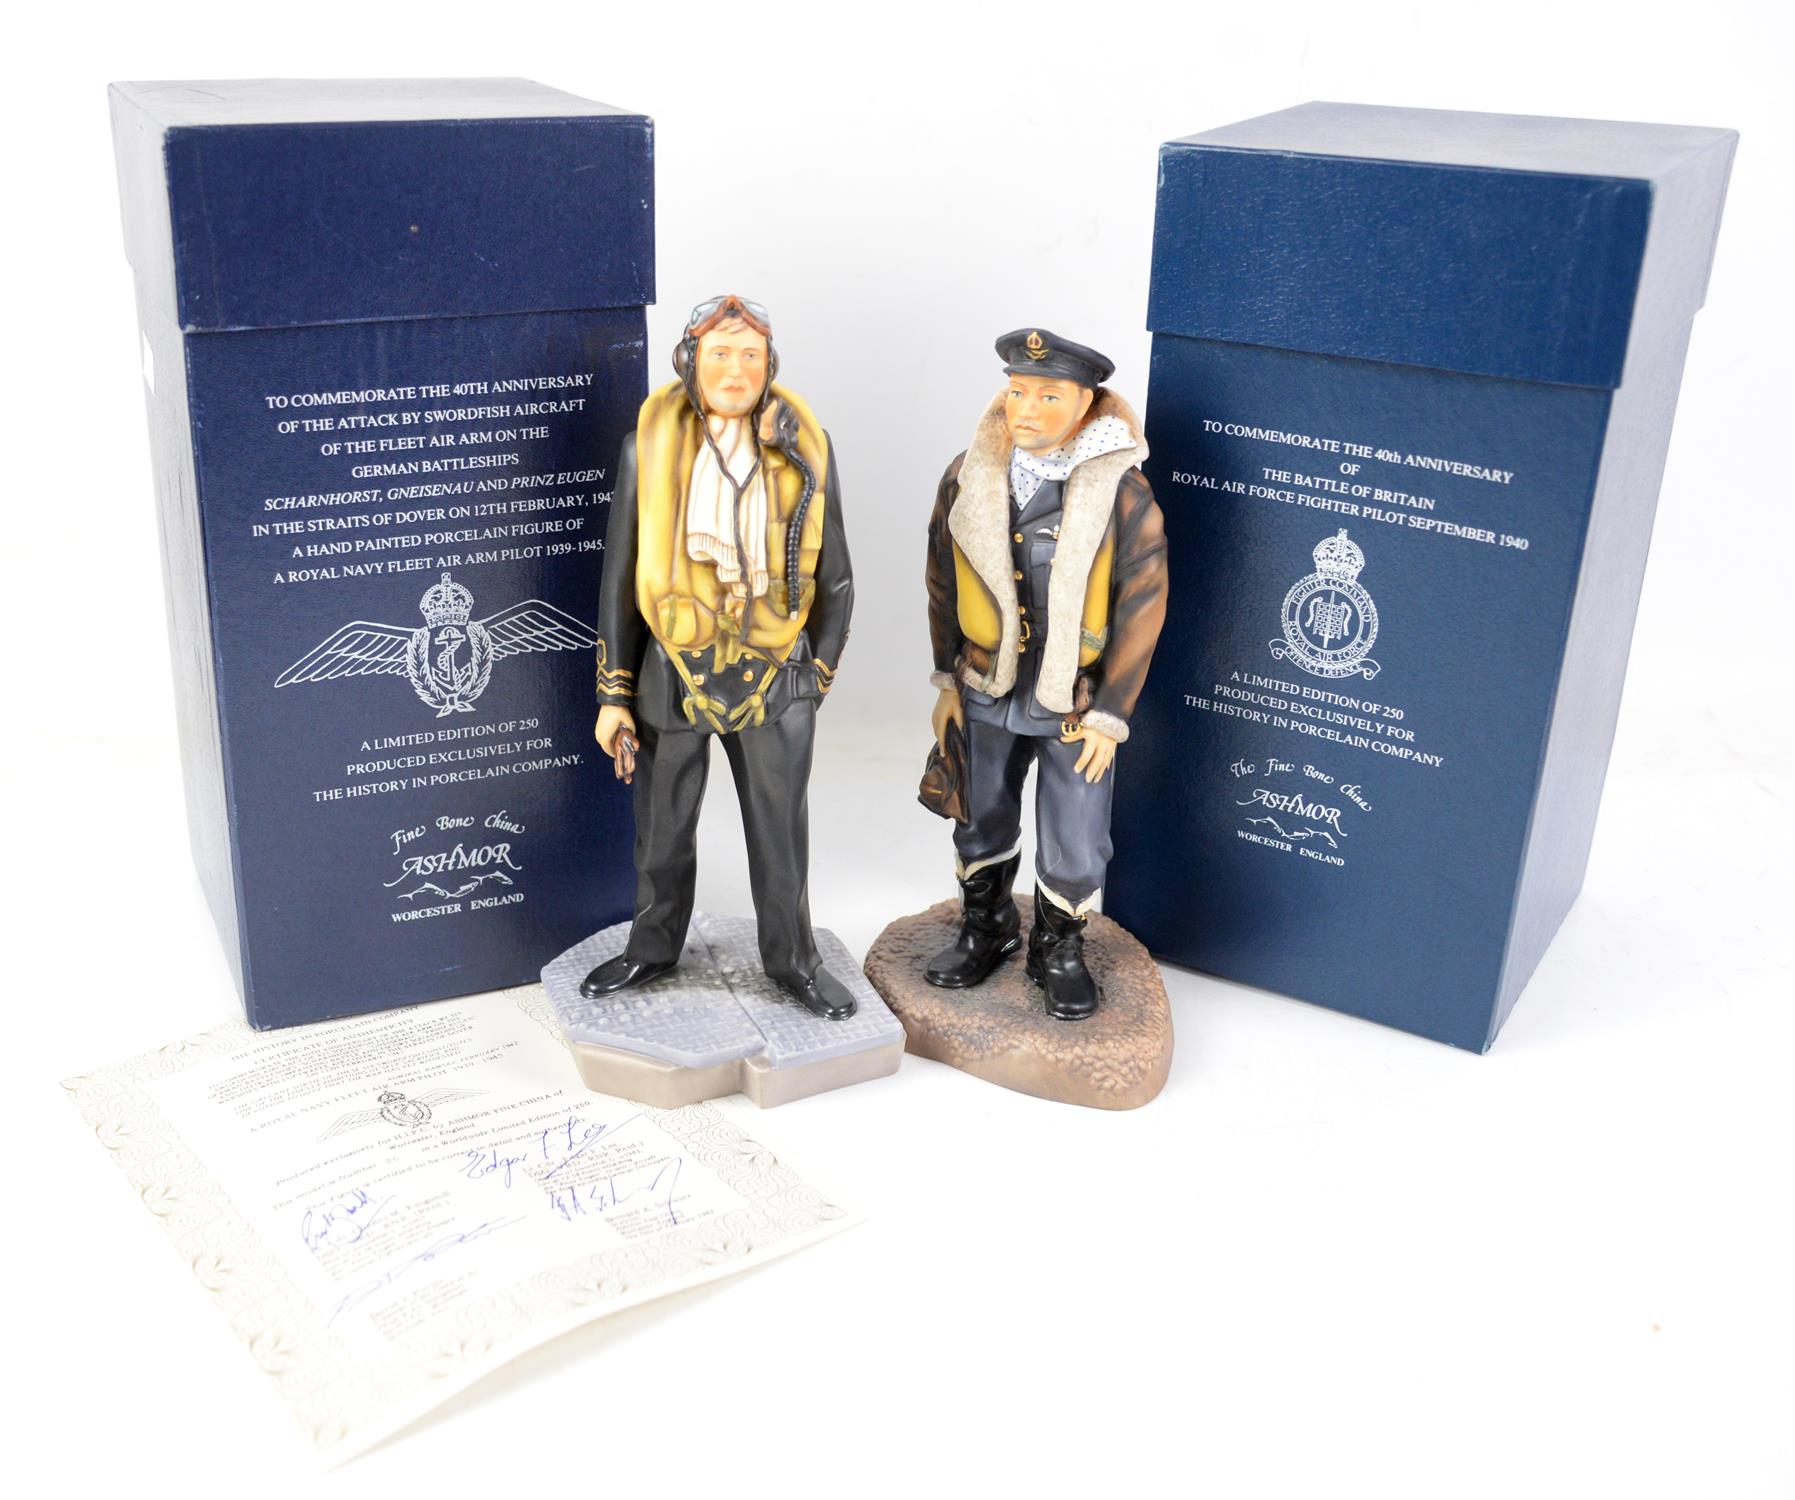 Ashmor Fine China for 'History in Porcelain' limited edition figure representing A Royal Navy Fleet